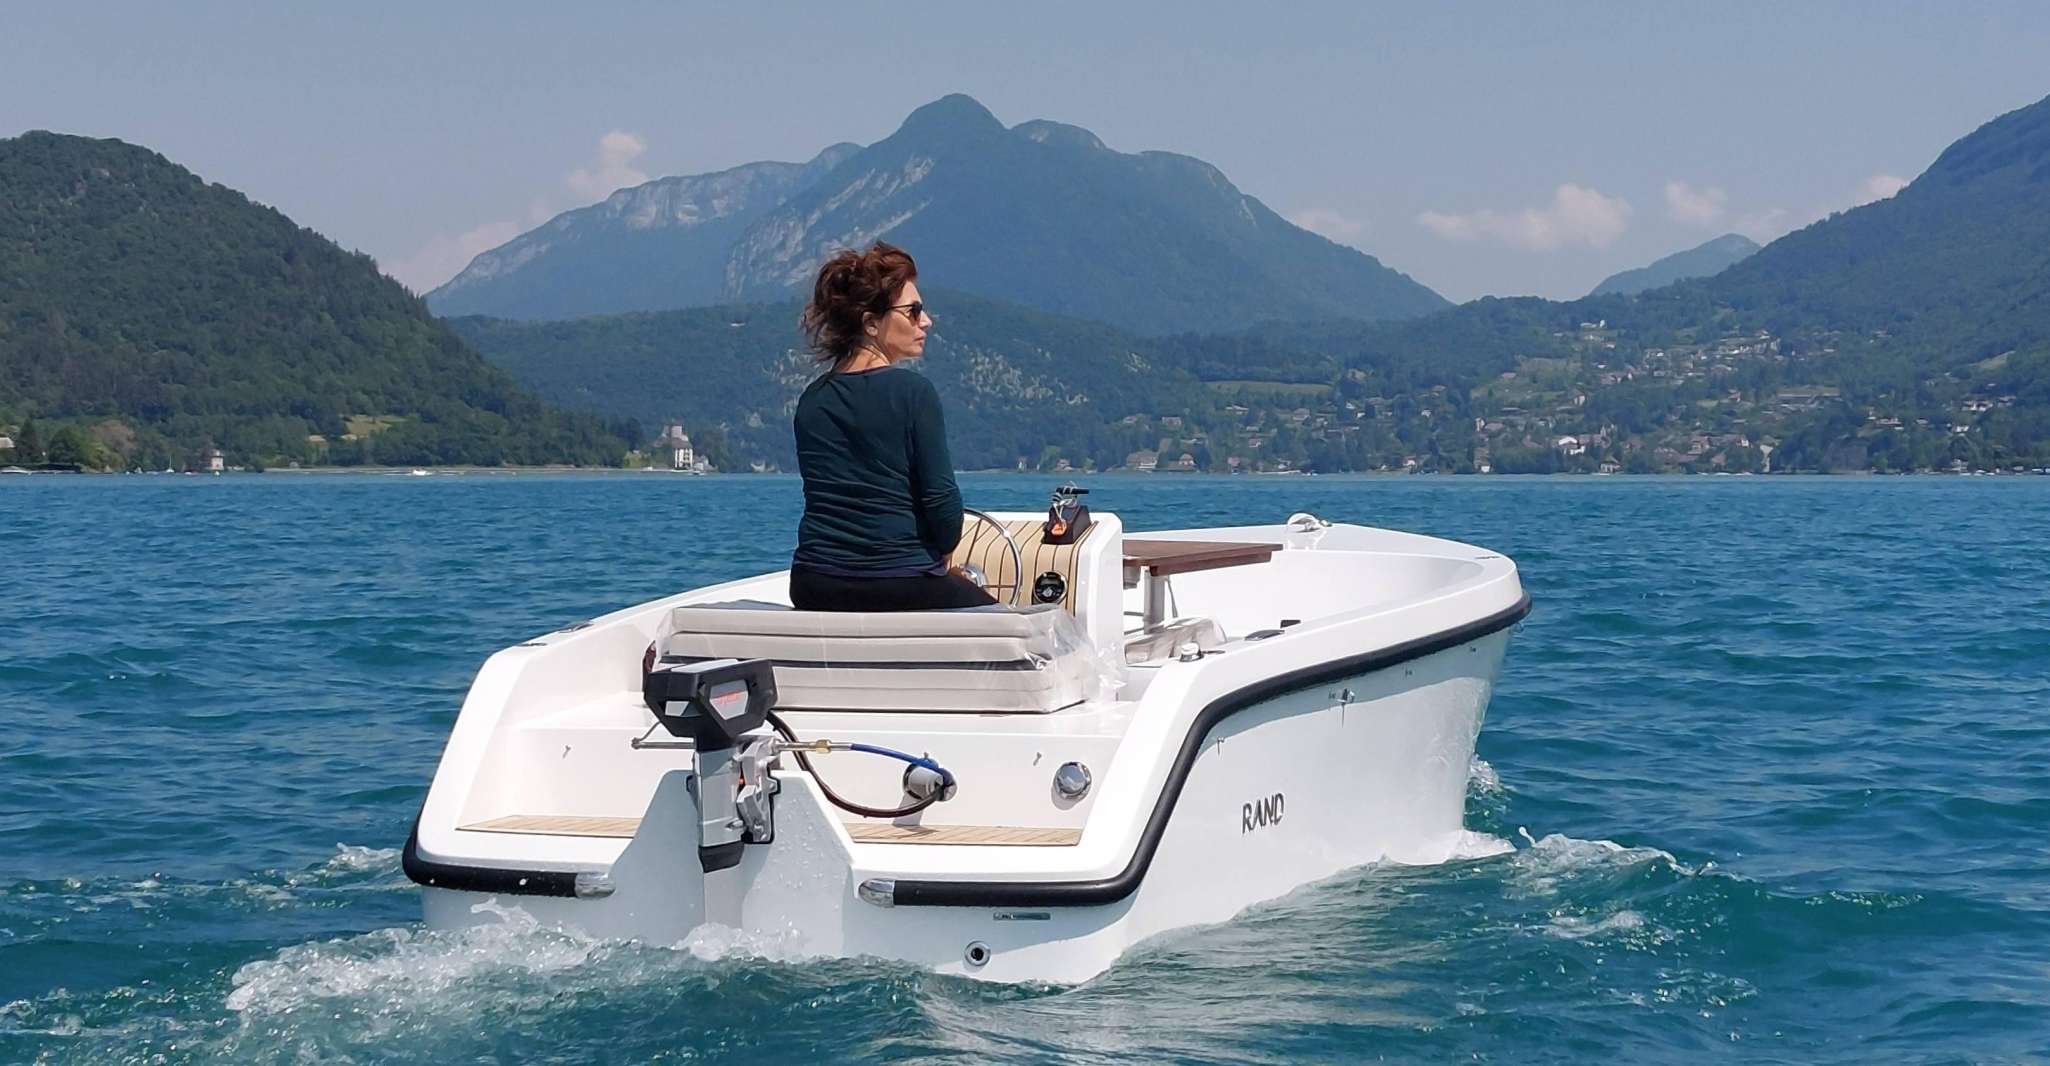 Veyrier-du-Lac, Electric Boat and Bike Experience - Housity